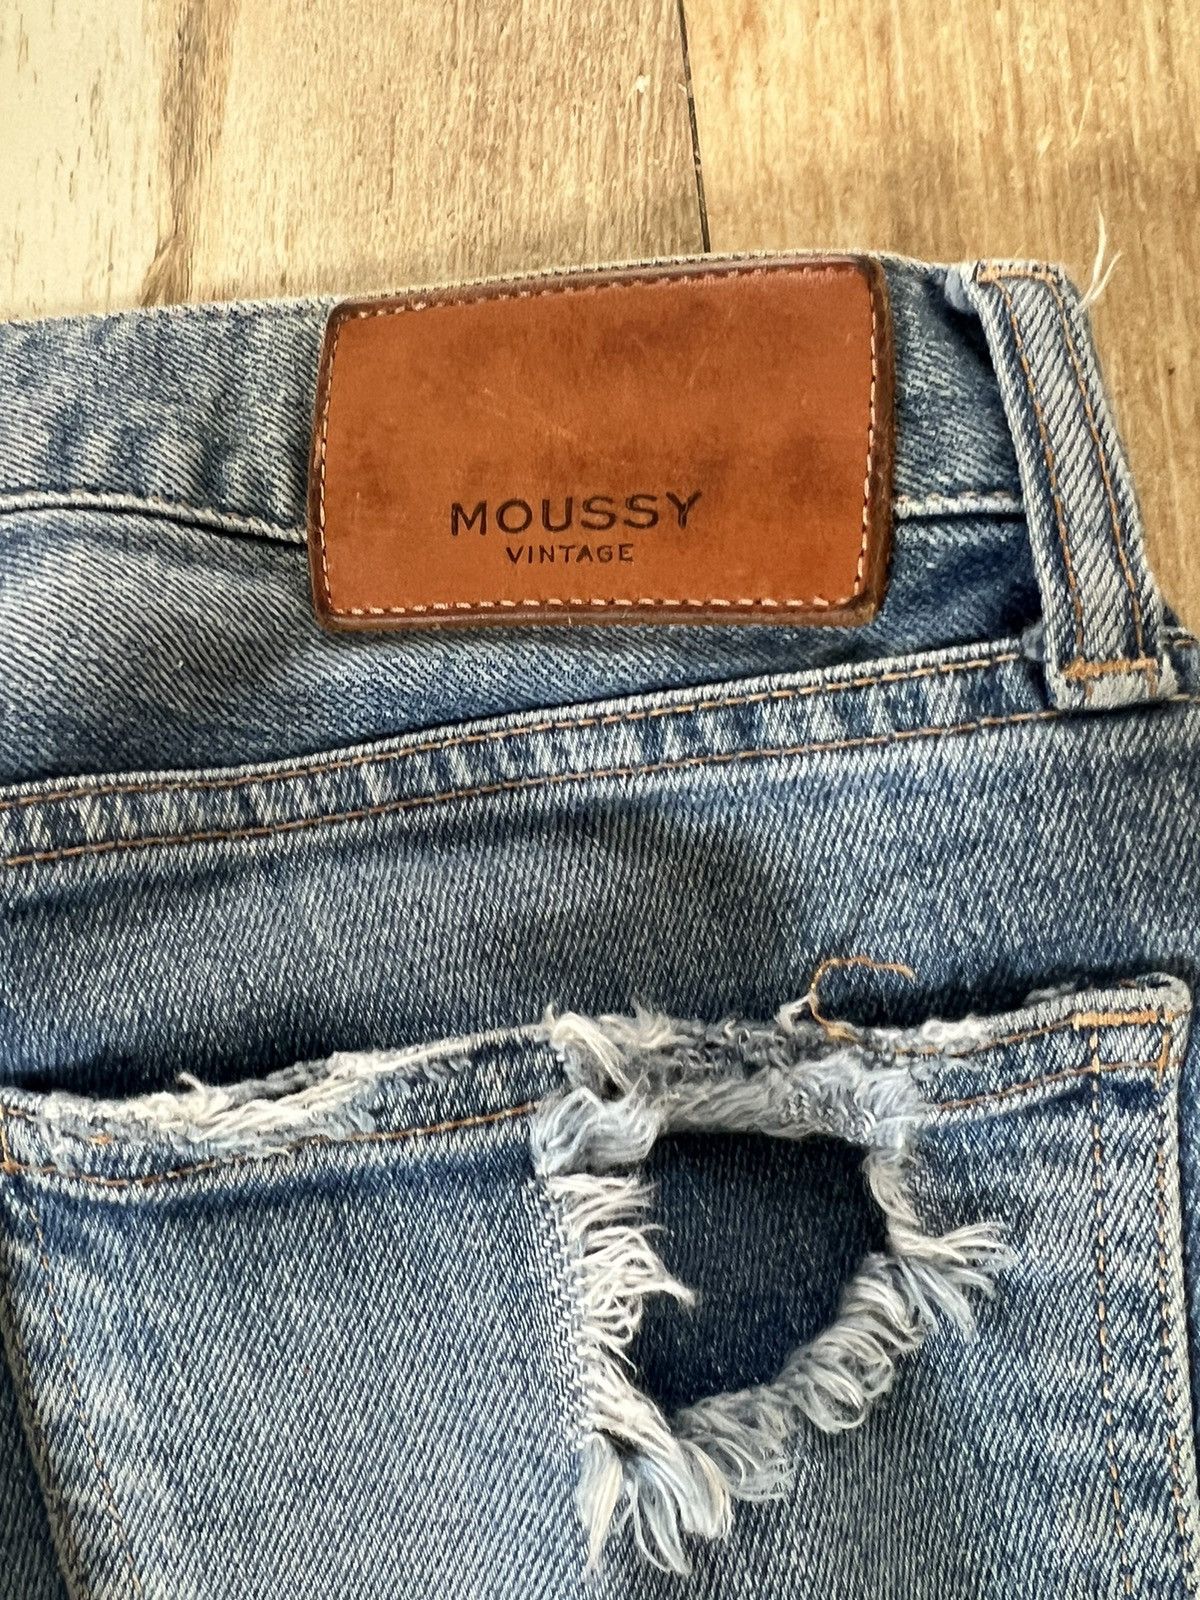 Japanese Brand Moussy Vintage Distressed Blue Jeans Size 27" / US 4 / IT 40 - 6 Thumbnail